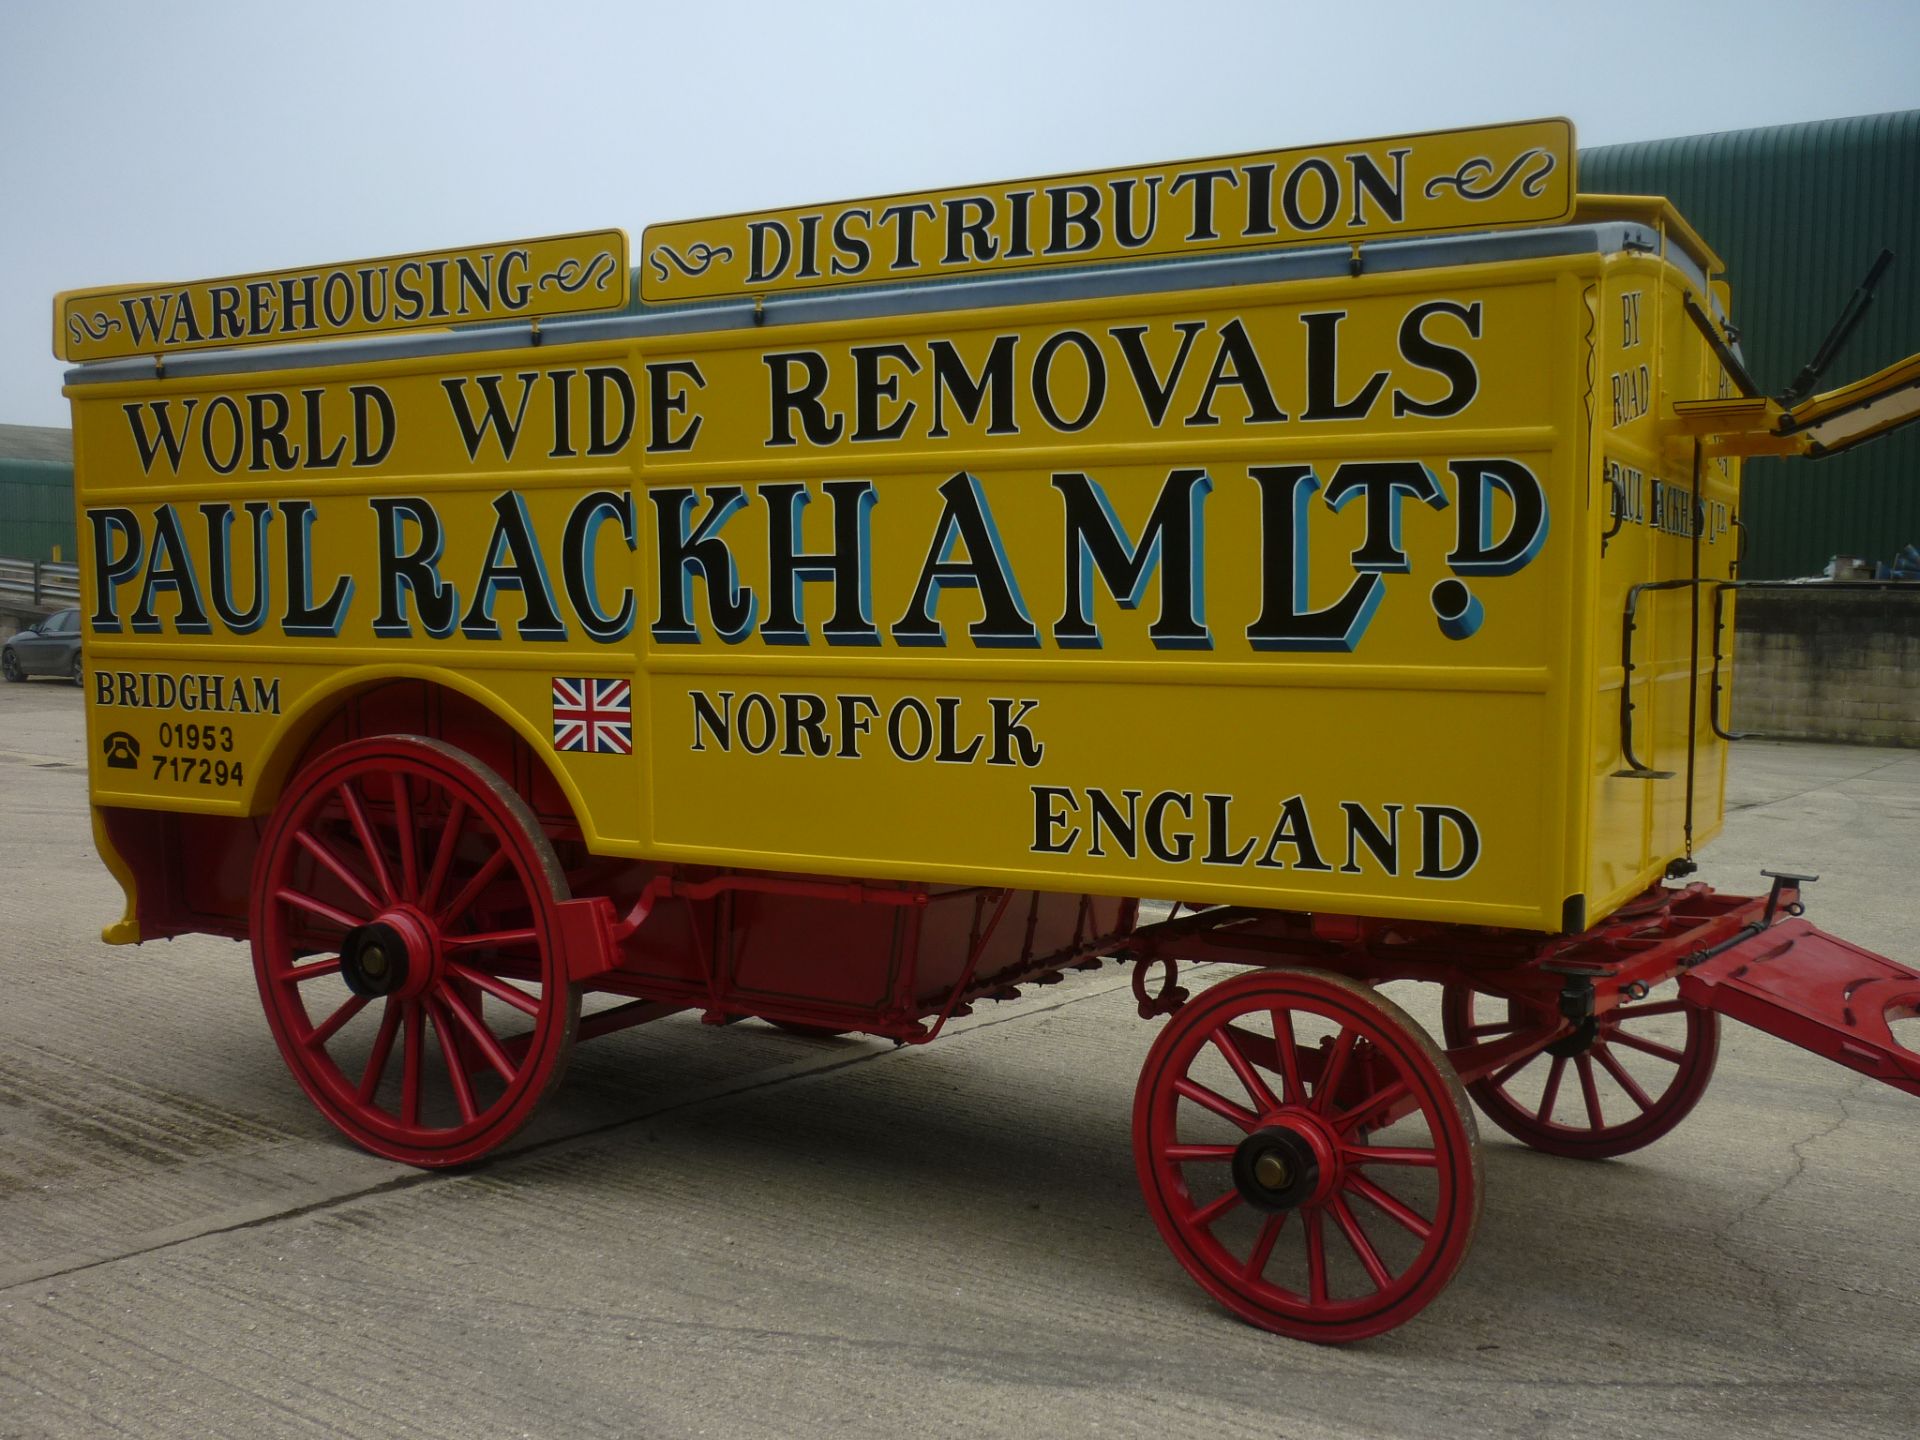 DROP WELL PANTECHNICON by Curtiss & Sons, Ltd., Pearl Buildings, Portsmouth circa 1900 to suit - Image 3 of 6